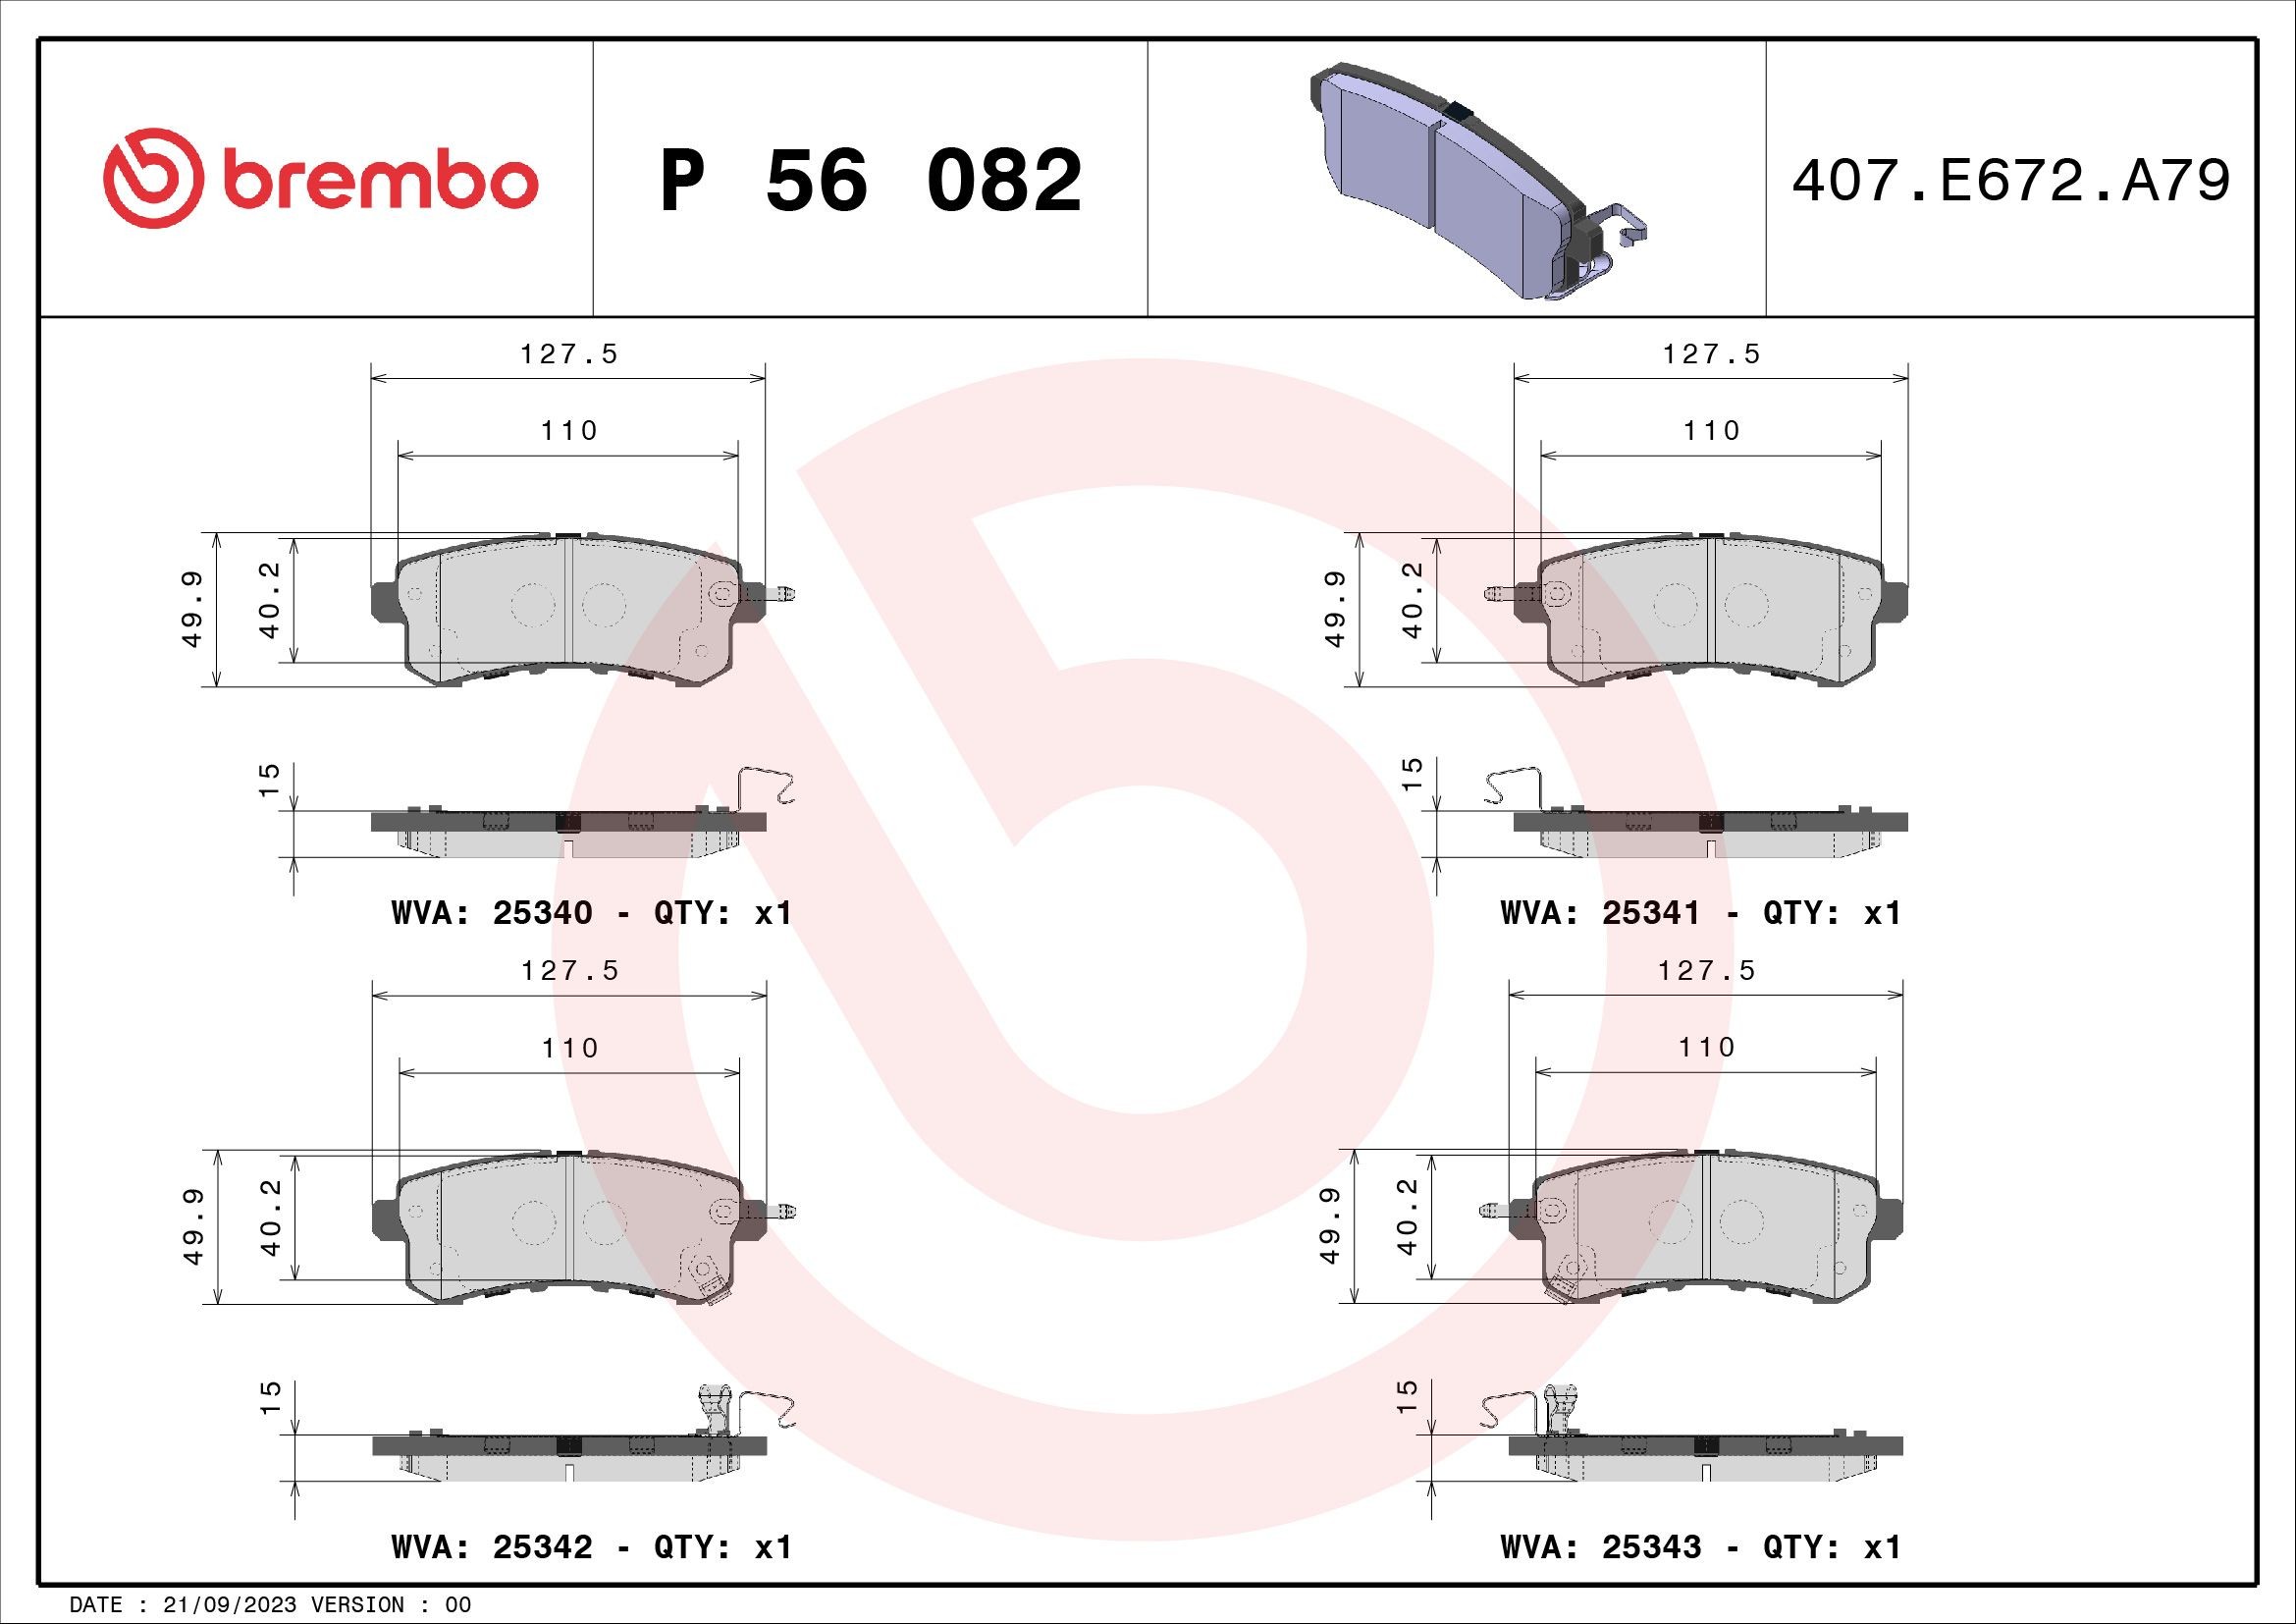 BREMBO P 56 082 Brake pad set with acoustic wear warning, without accessories